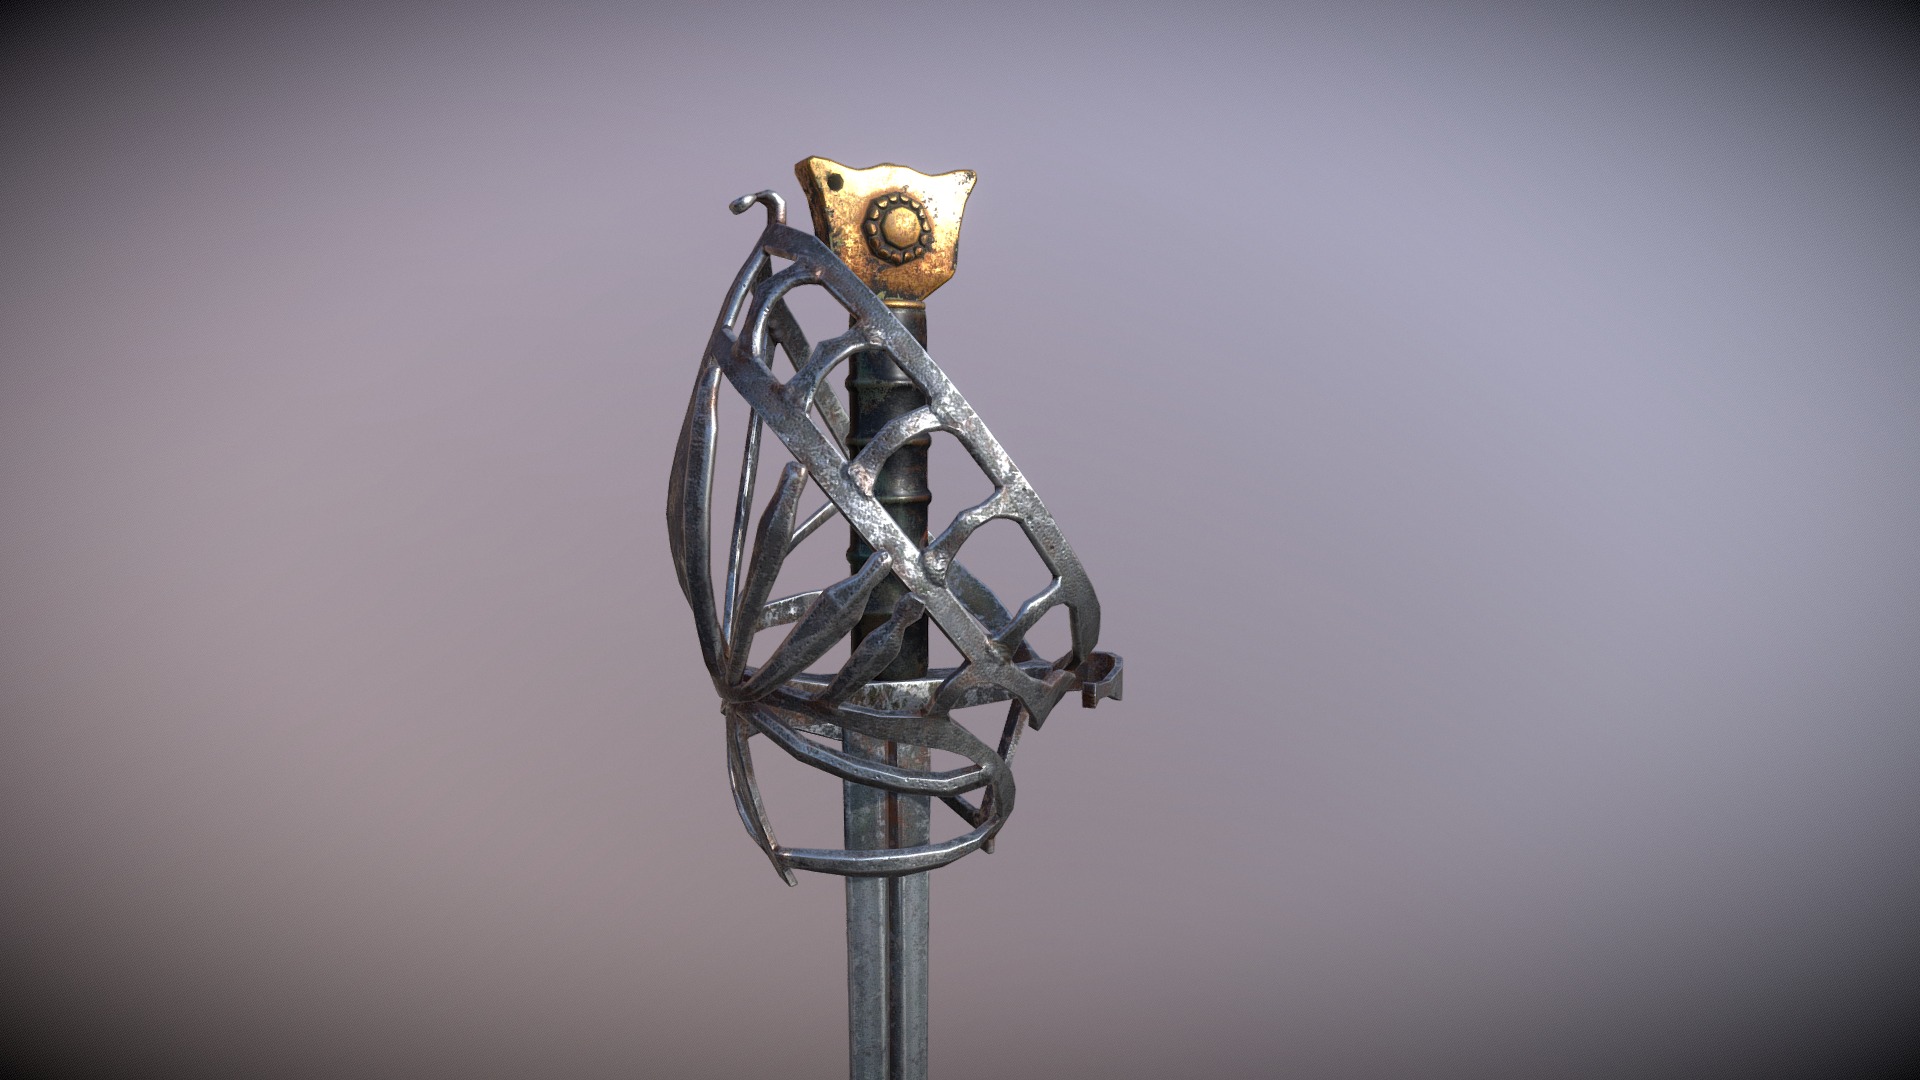 3D model Renaissance sword - This is a 3D model of the Renaissance sword. The 3D model is about a metal tower with a round object on top.